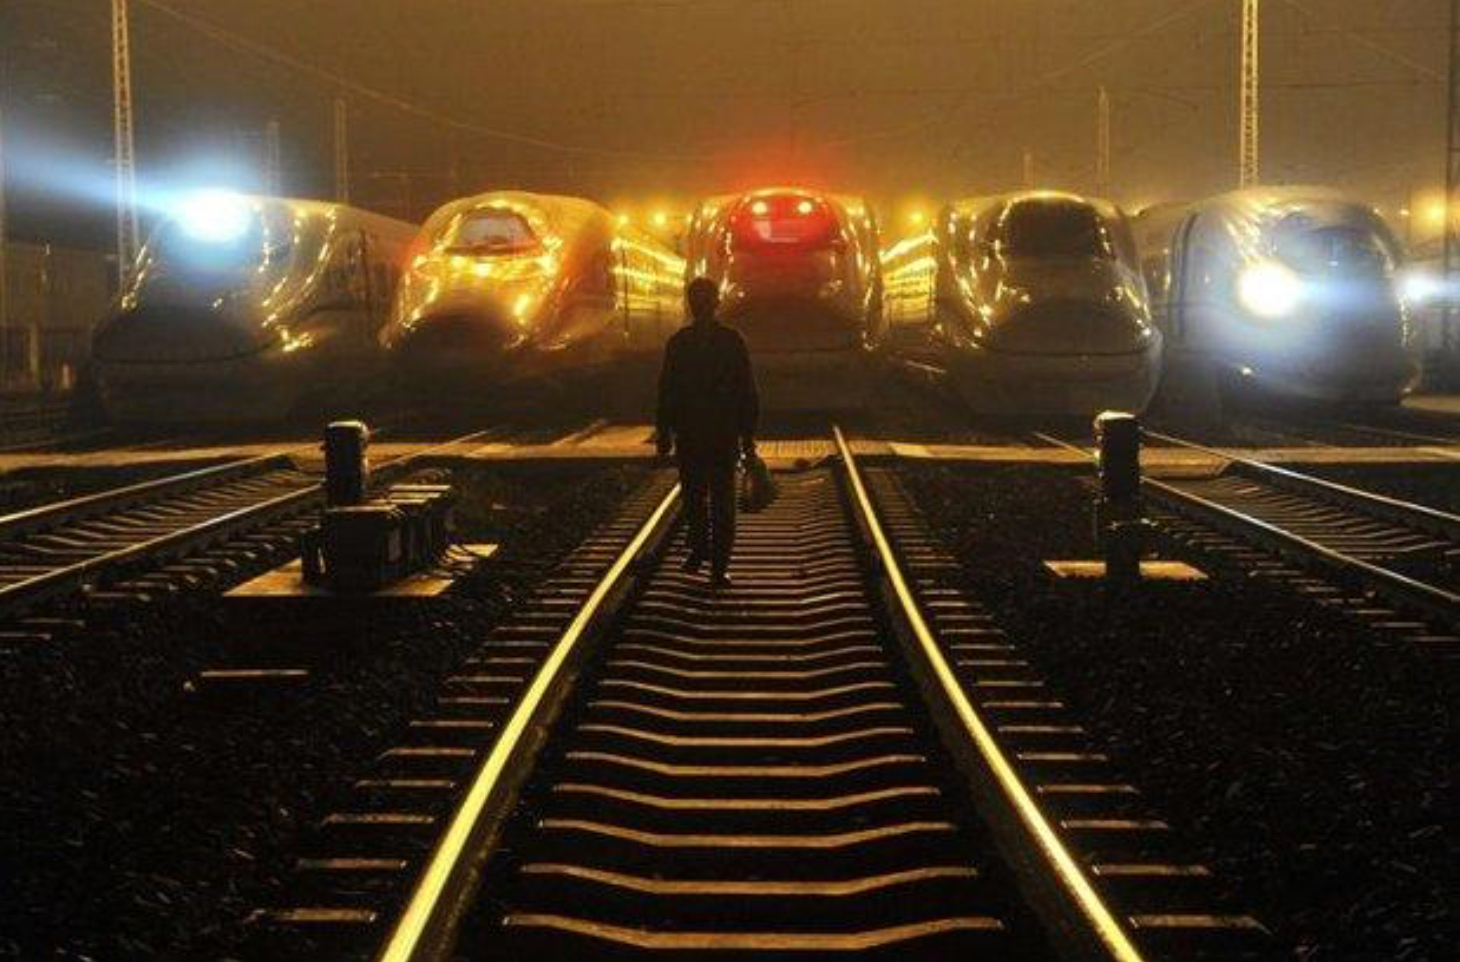 A railway worker walks in front of bullet trains at Hefei, China, built like many railways around the world entirely by Chinese labour with Chinese supervision. (Reuters photo)